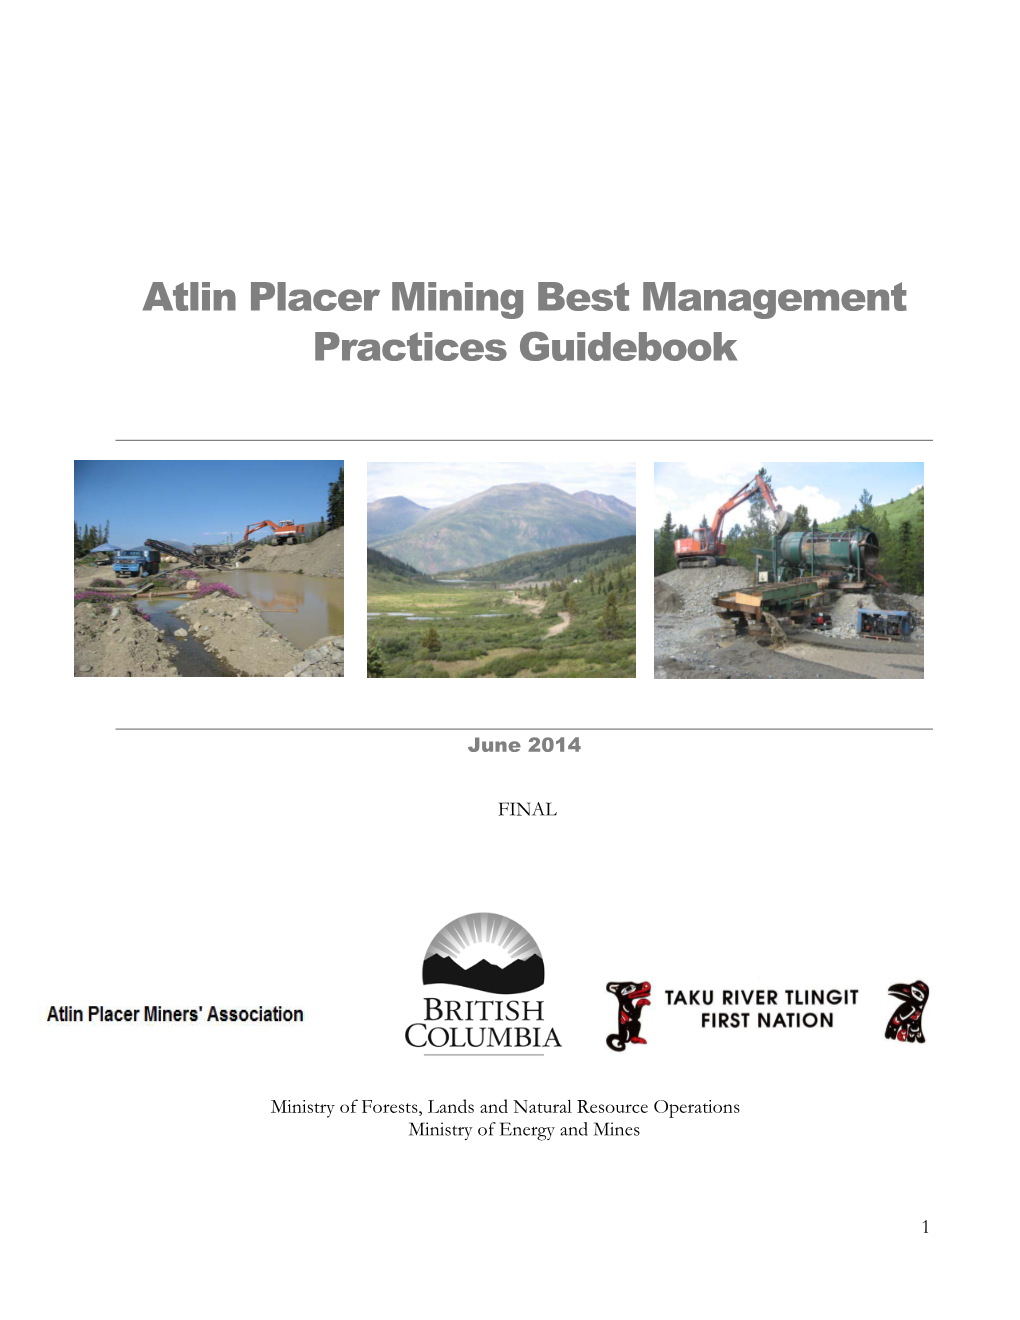 Atlin Placer Mining Best Management Practices Guidebook